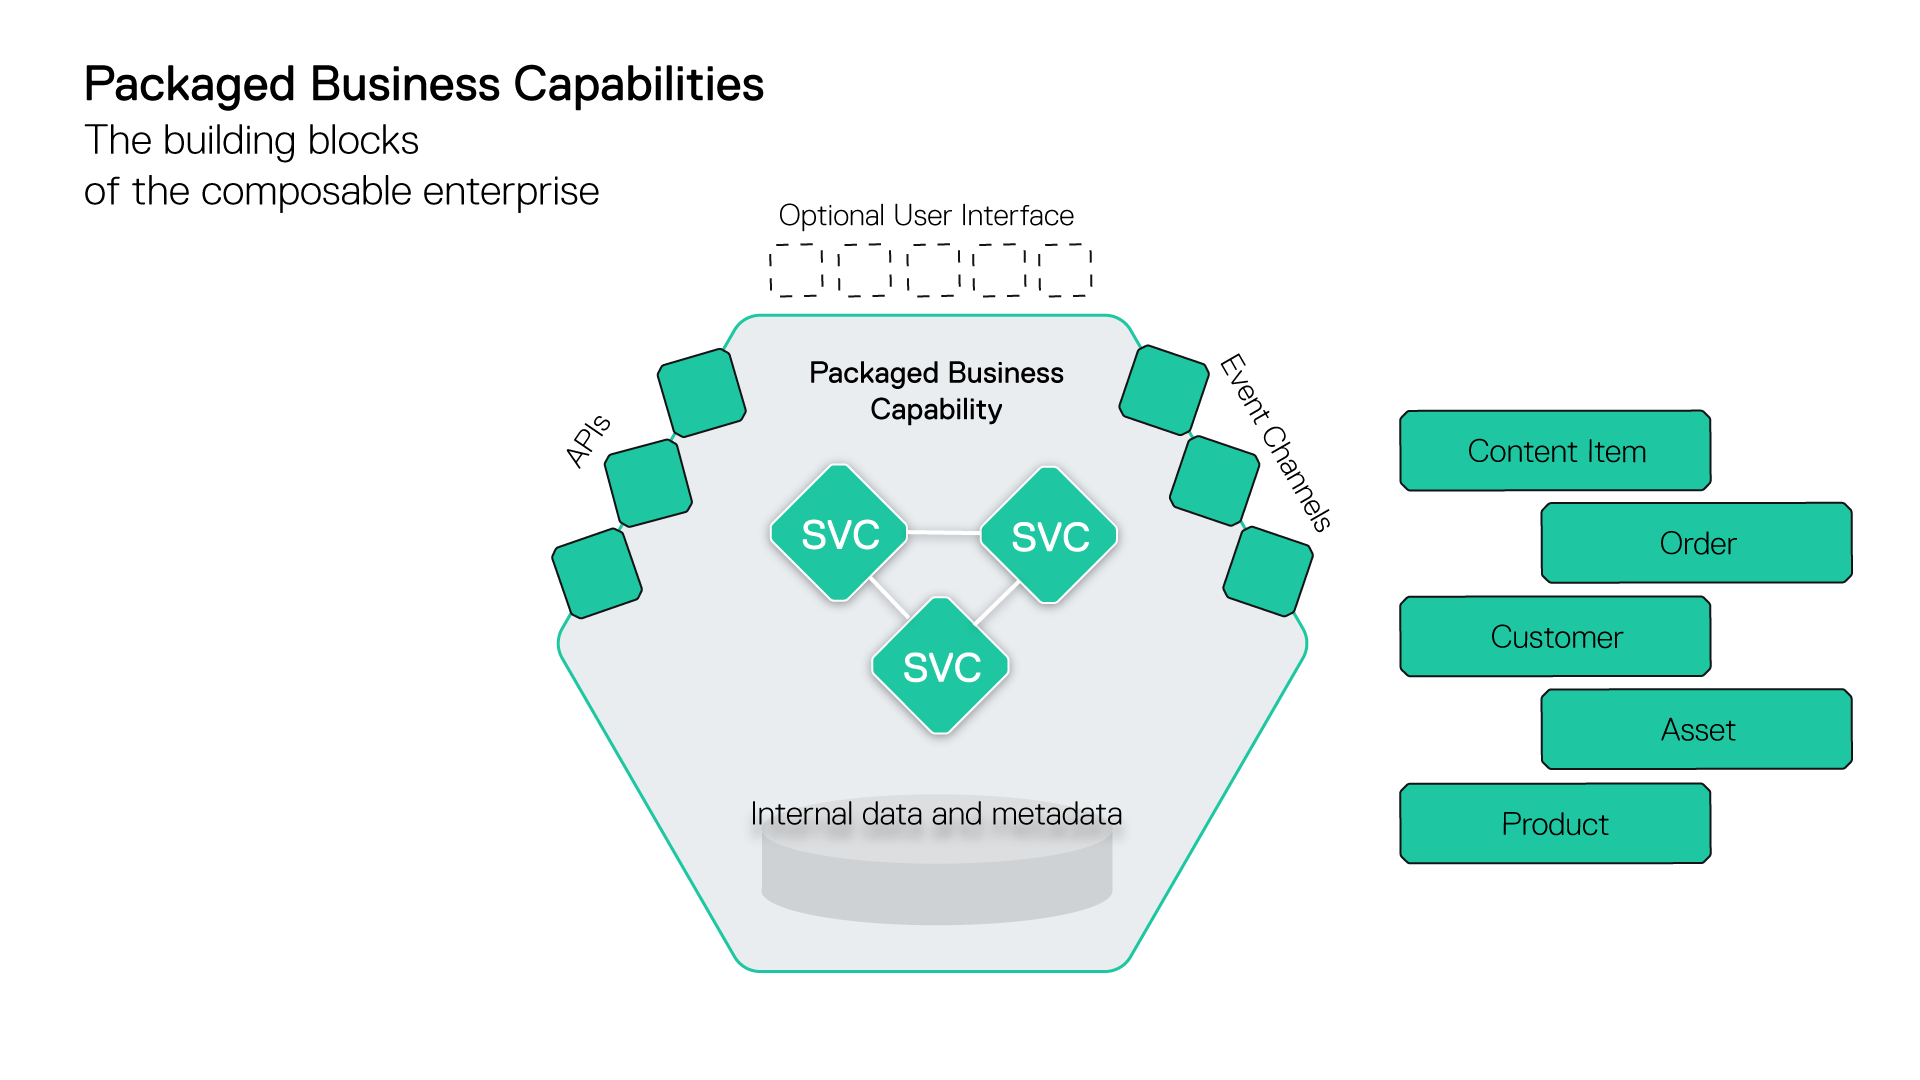 Packaged Business Capabilities